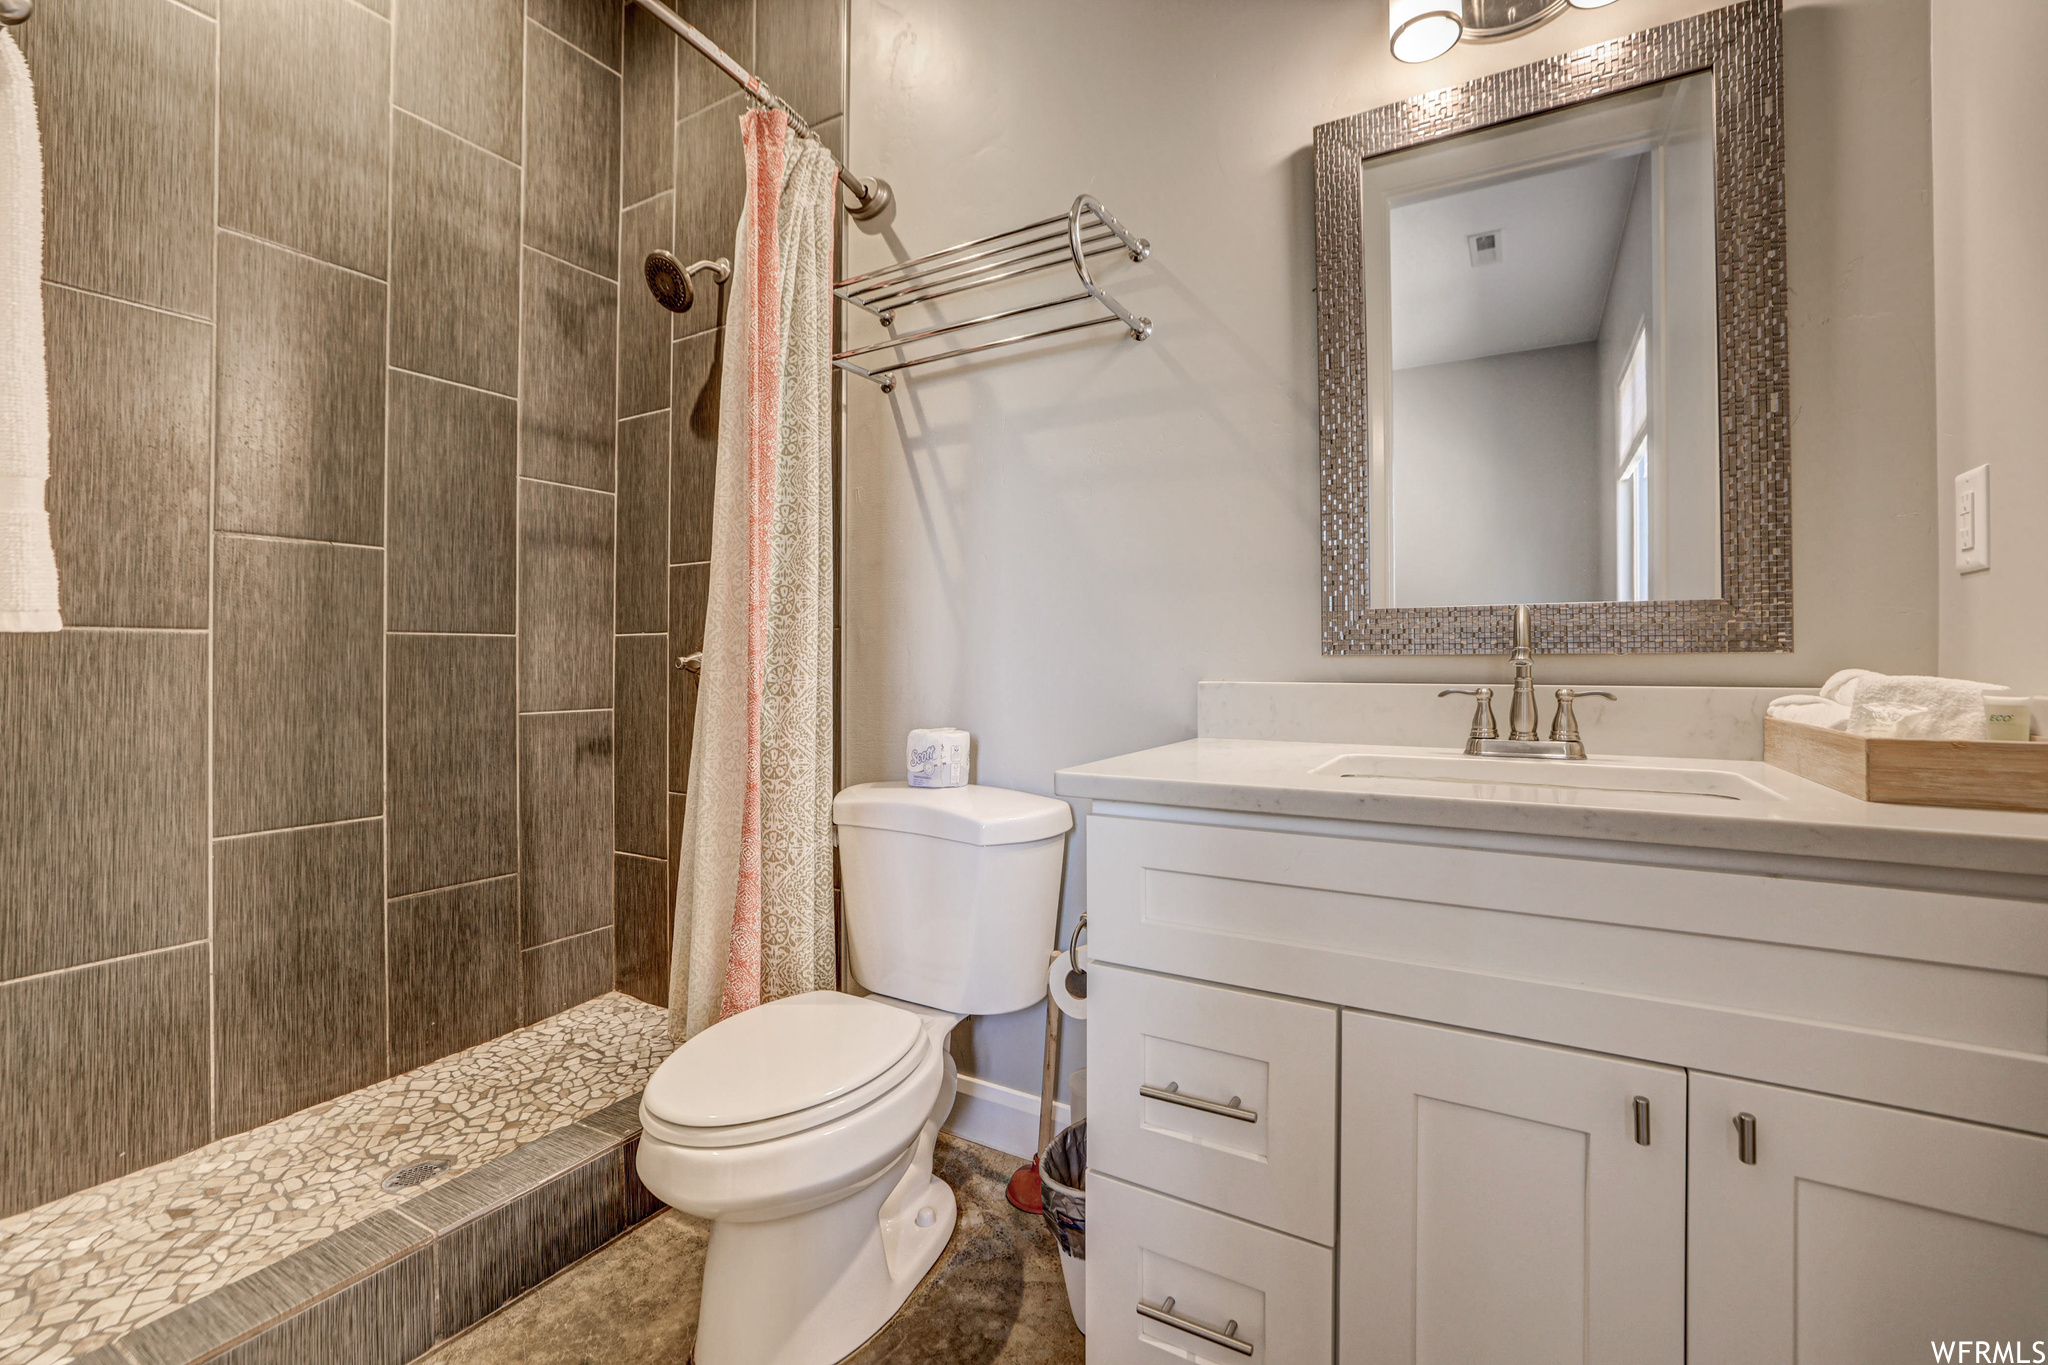 Bathroom with toilet, vanity with extensive cabinet space, shower curtain, mirror, and a shower